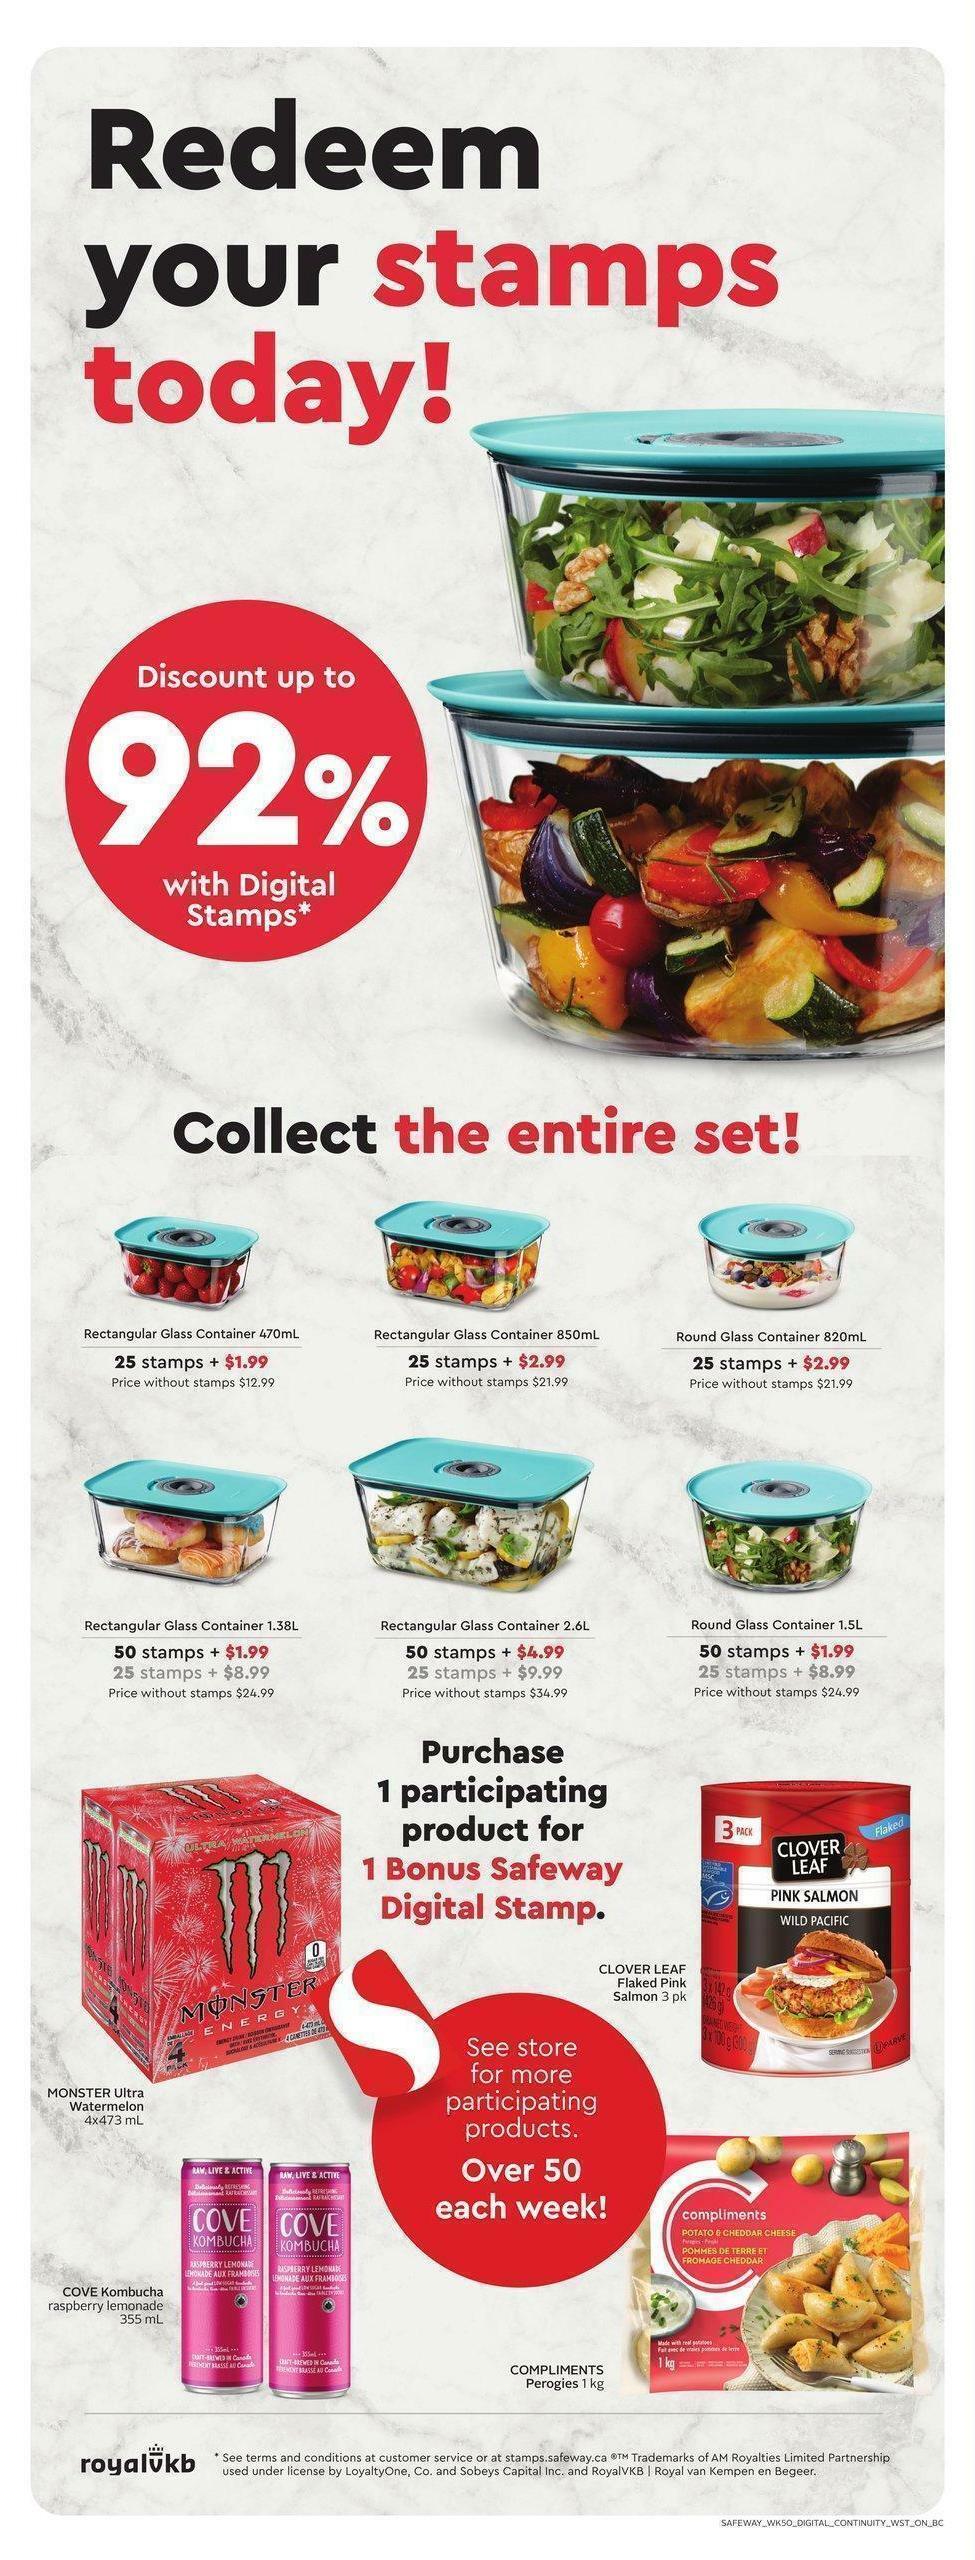 Safeway Flyer from April 7